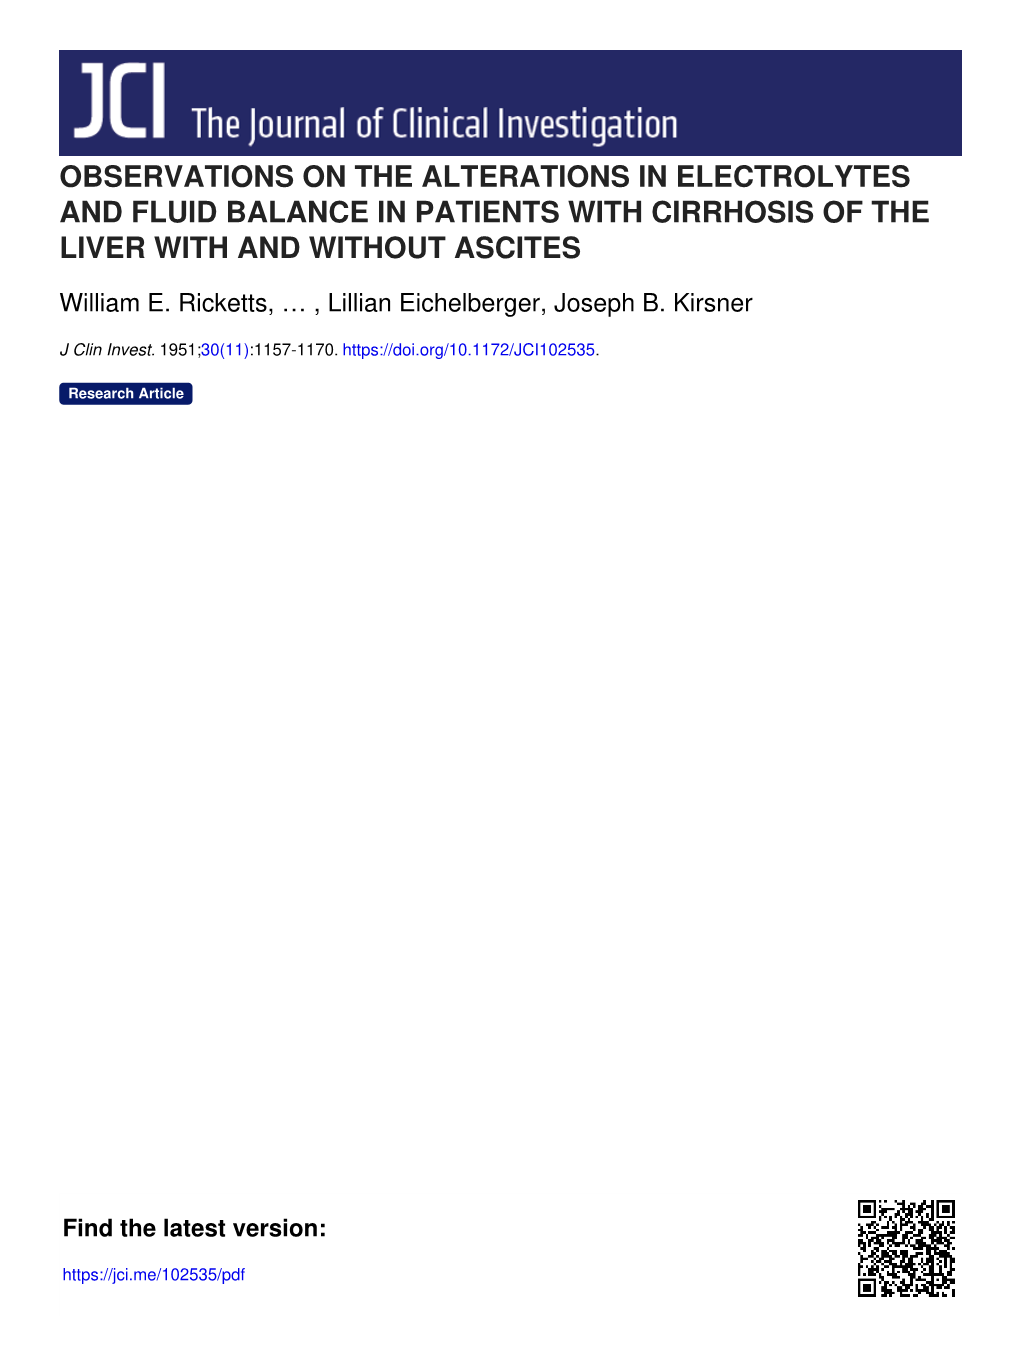 Observations on the Alterations in Electrolytes and Fluid Balance in Patients with Cirrhosis of the Liver with and Without Ascites